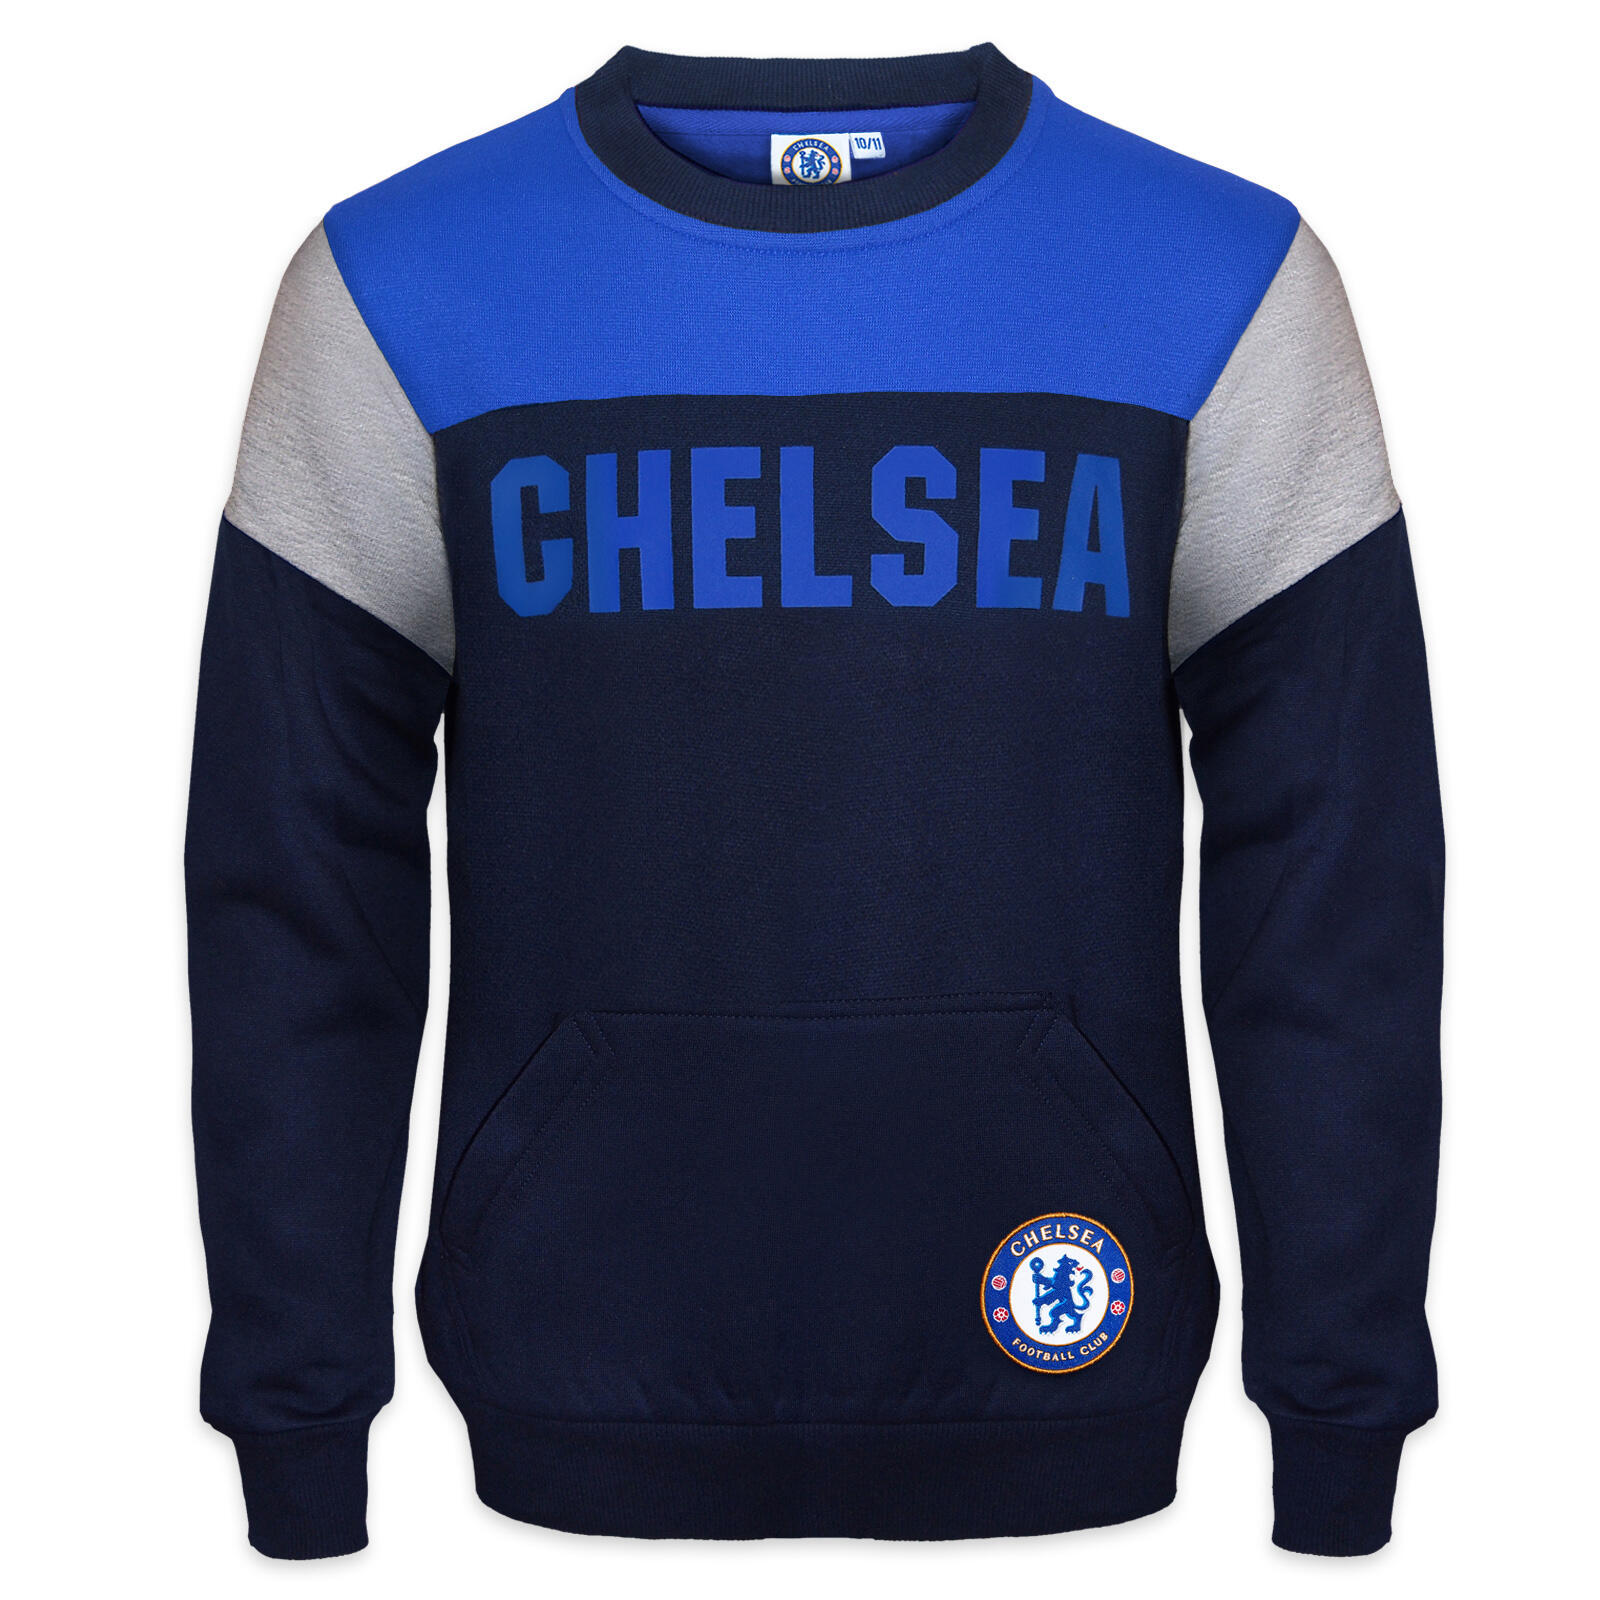 Chelsea FC Boys Sweatshirt Graphic Top Kids OFFICIAL Football Gift 1/3